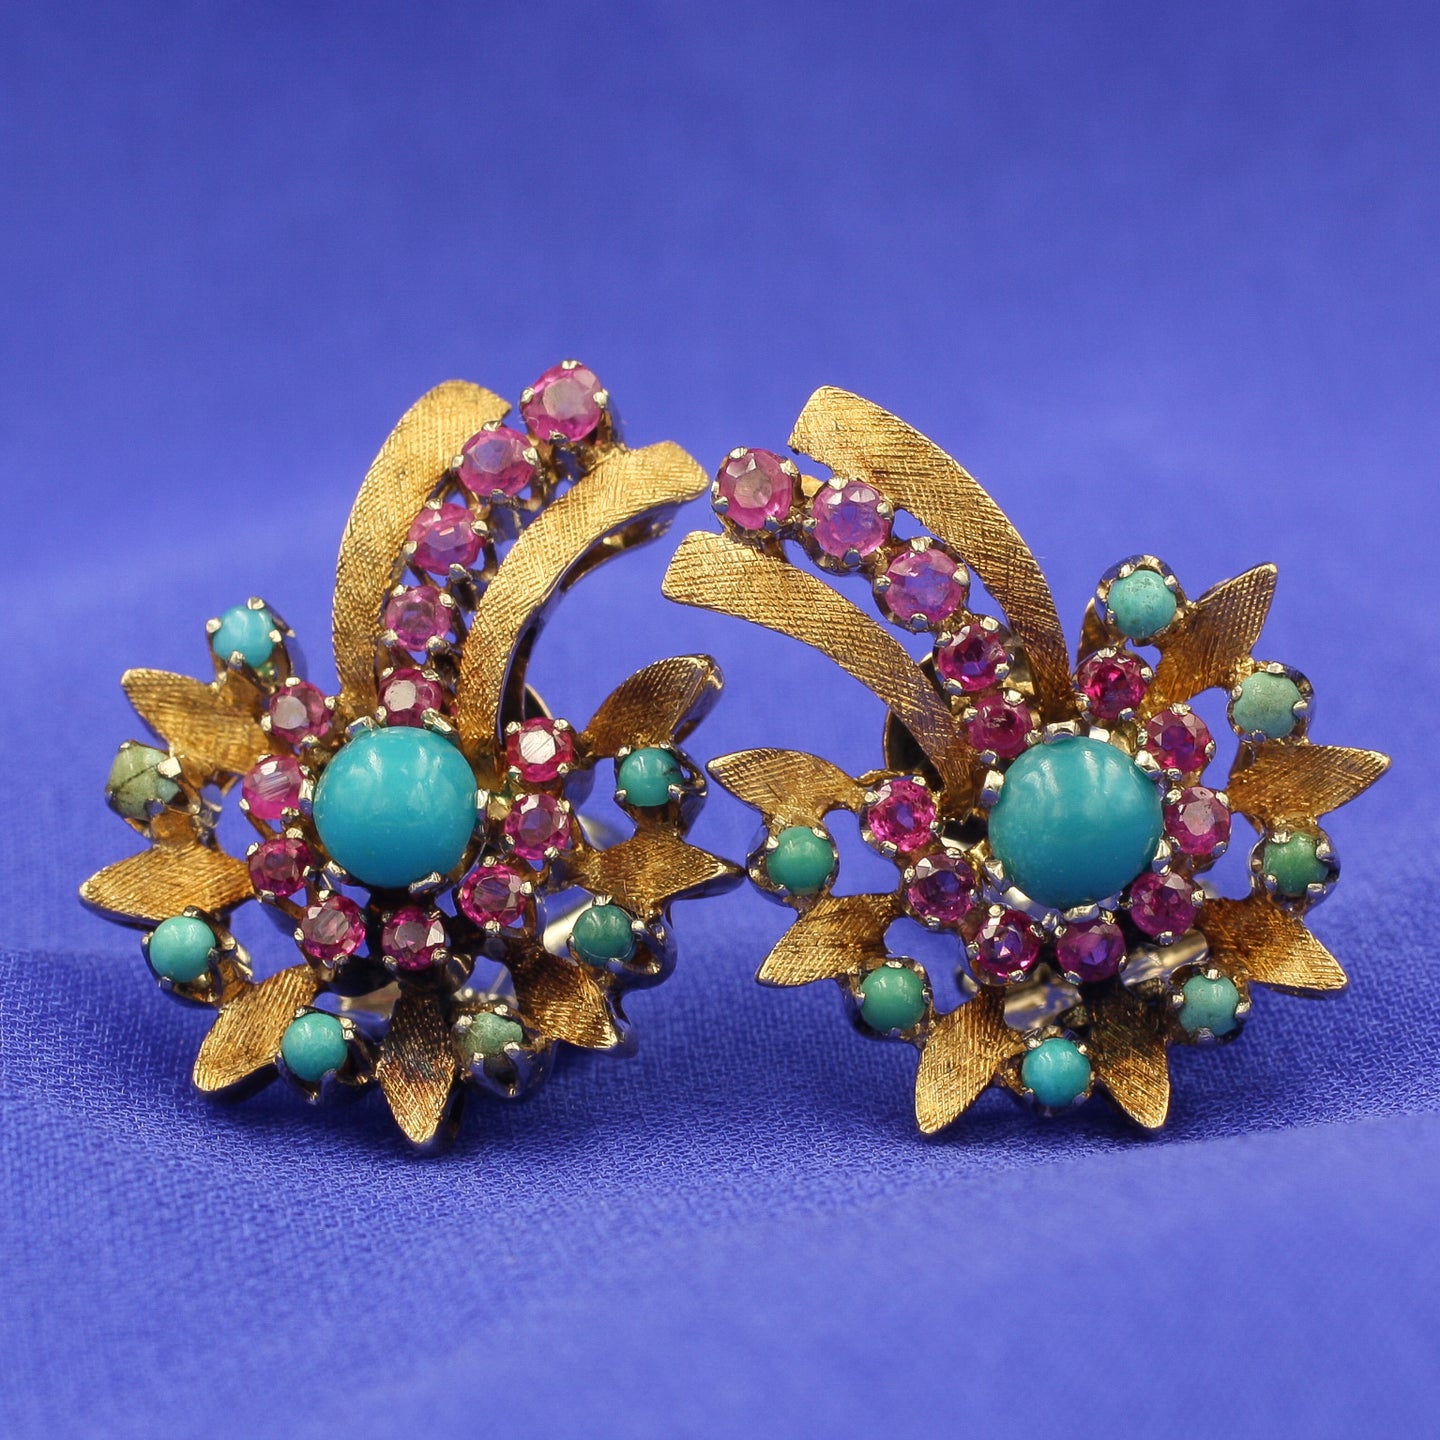 Turquoise and Ruby Comet Earrings, 1930s